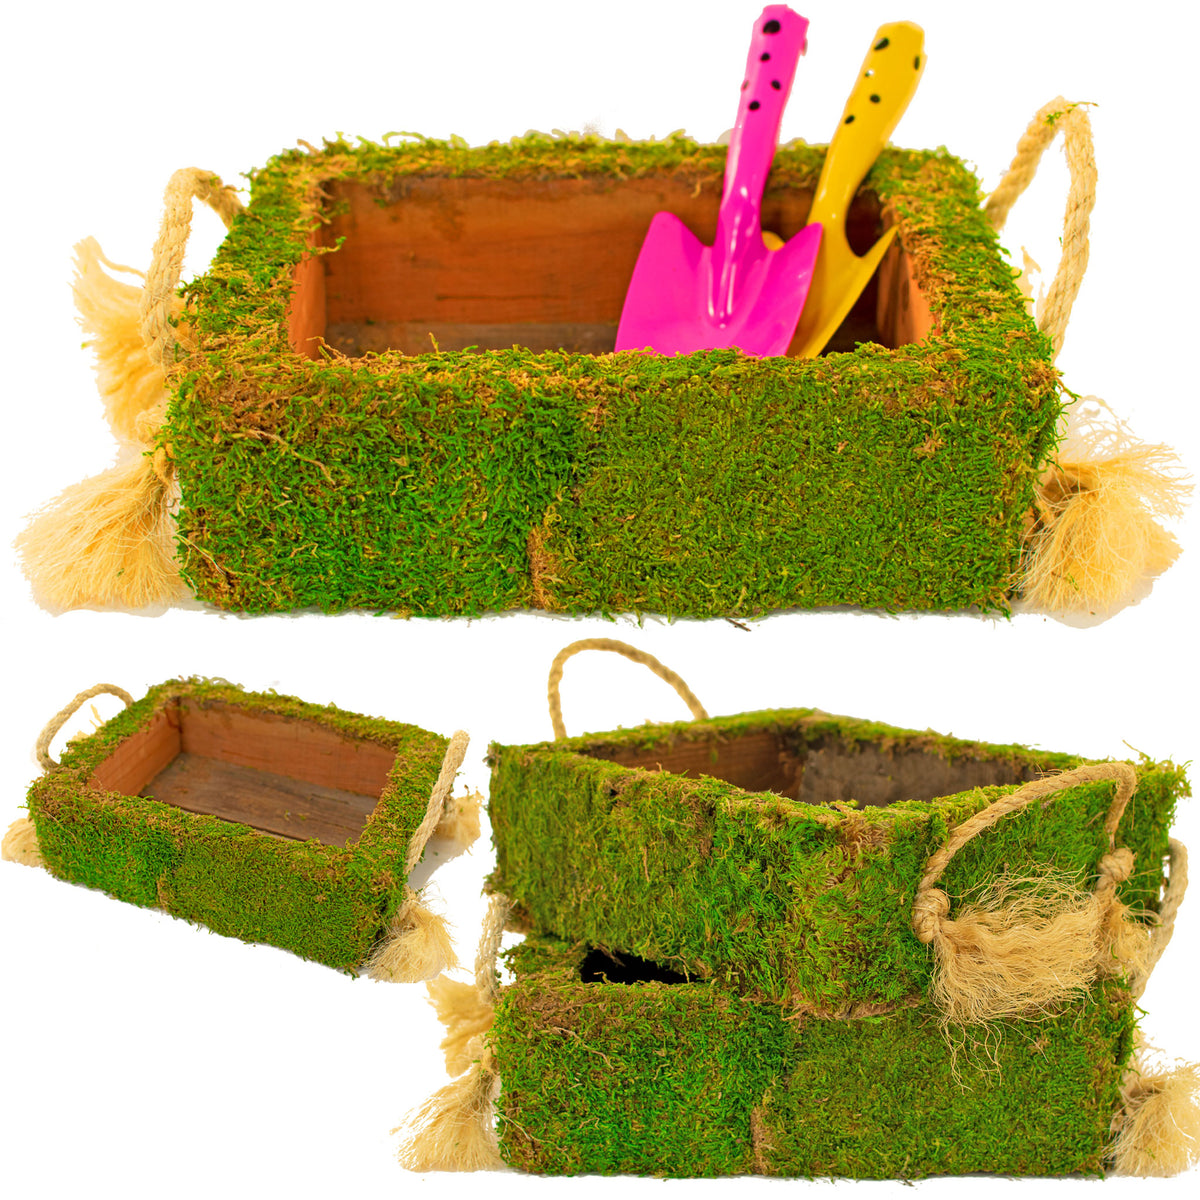 Moss Covered Planter Boxes are beautiful home decor additions.